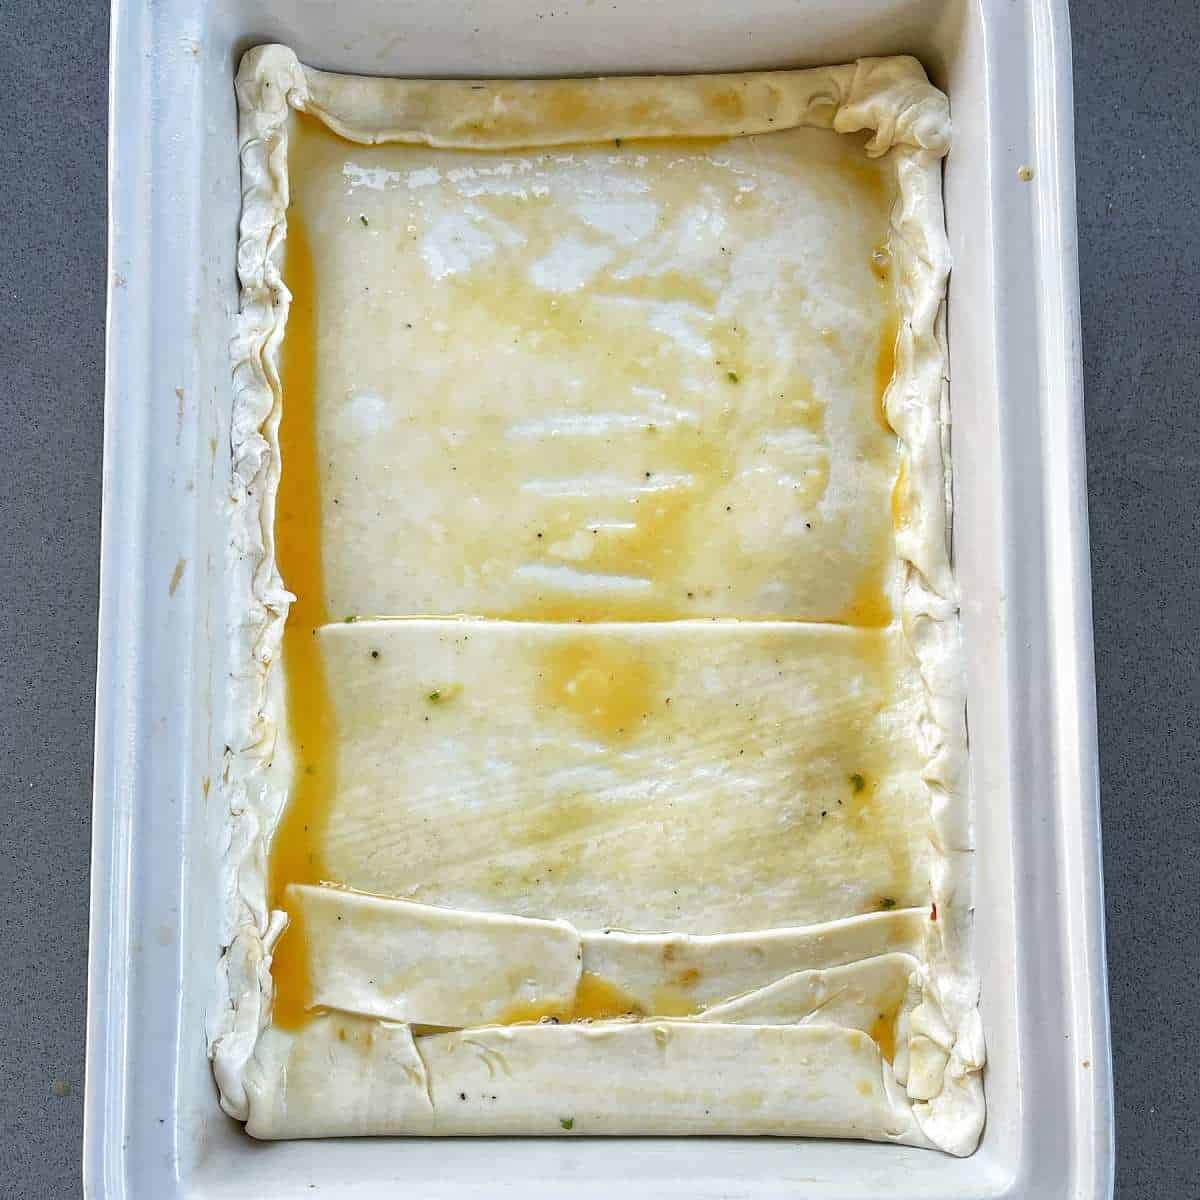 Uncooked bacon and egg pie in oven proof dish